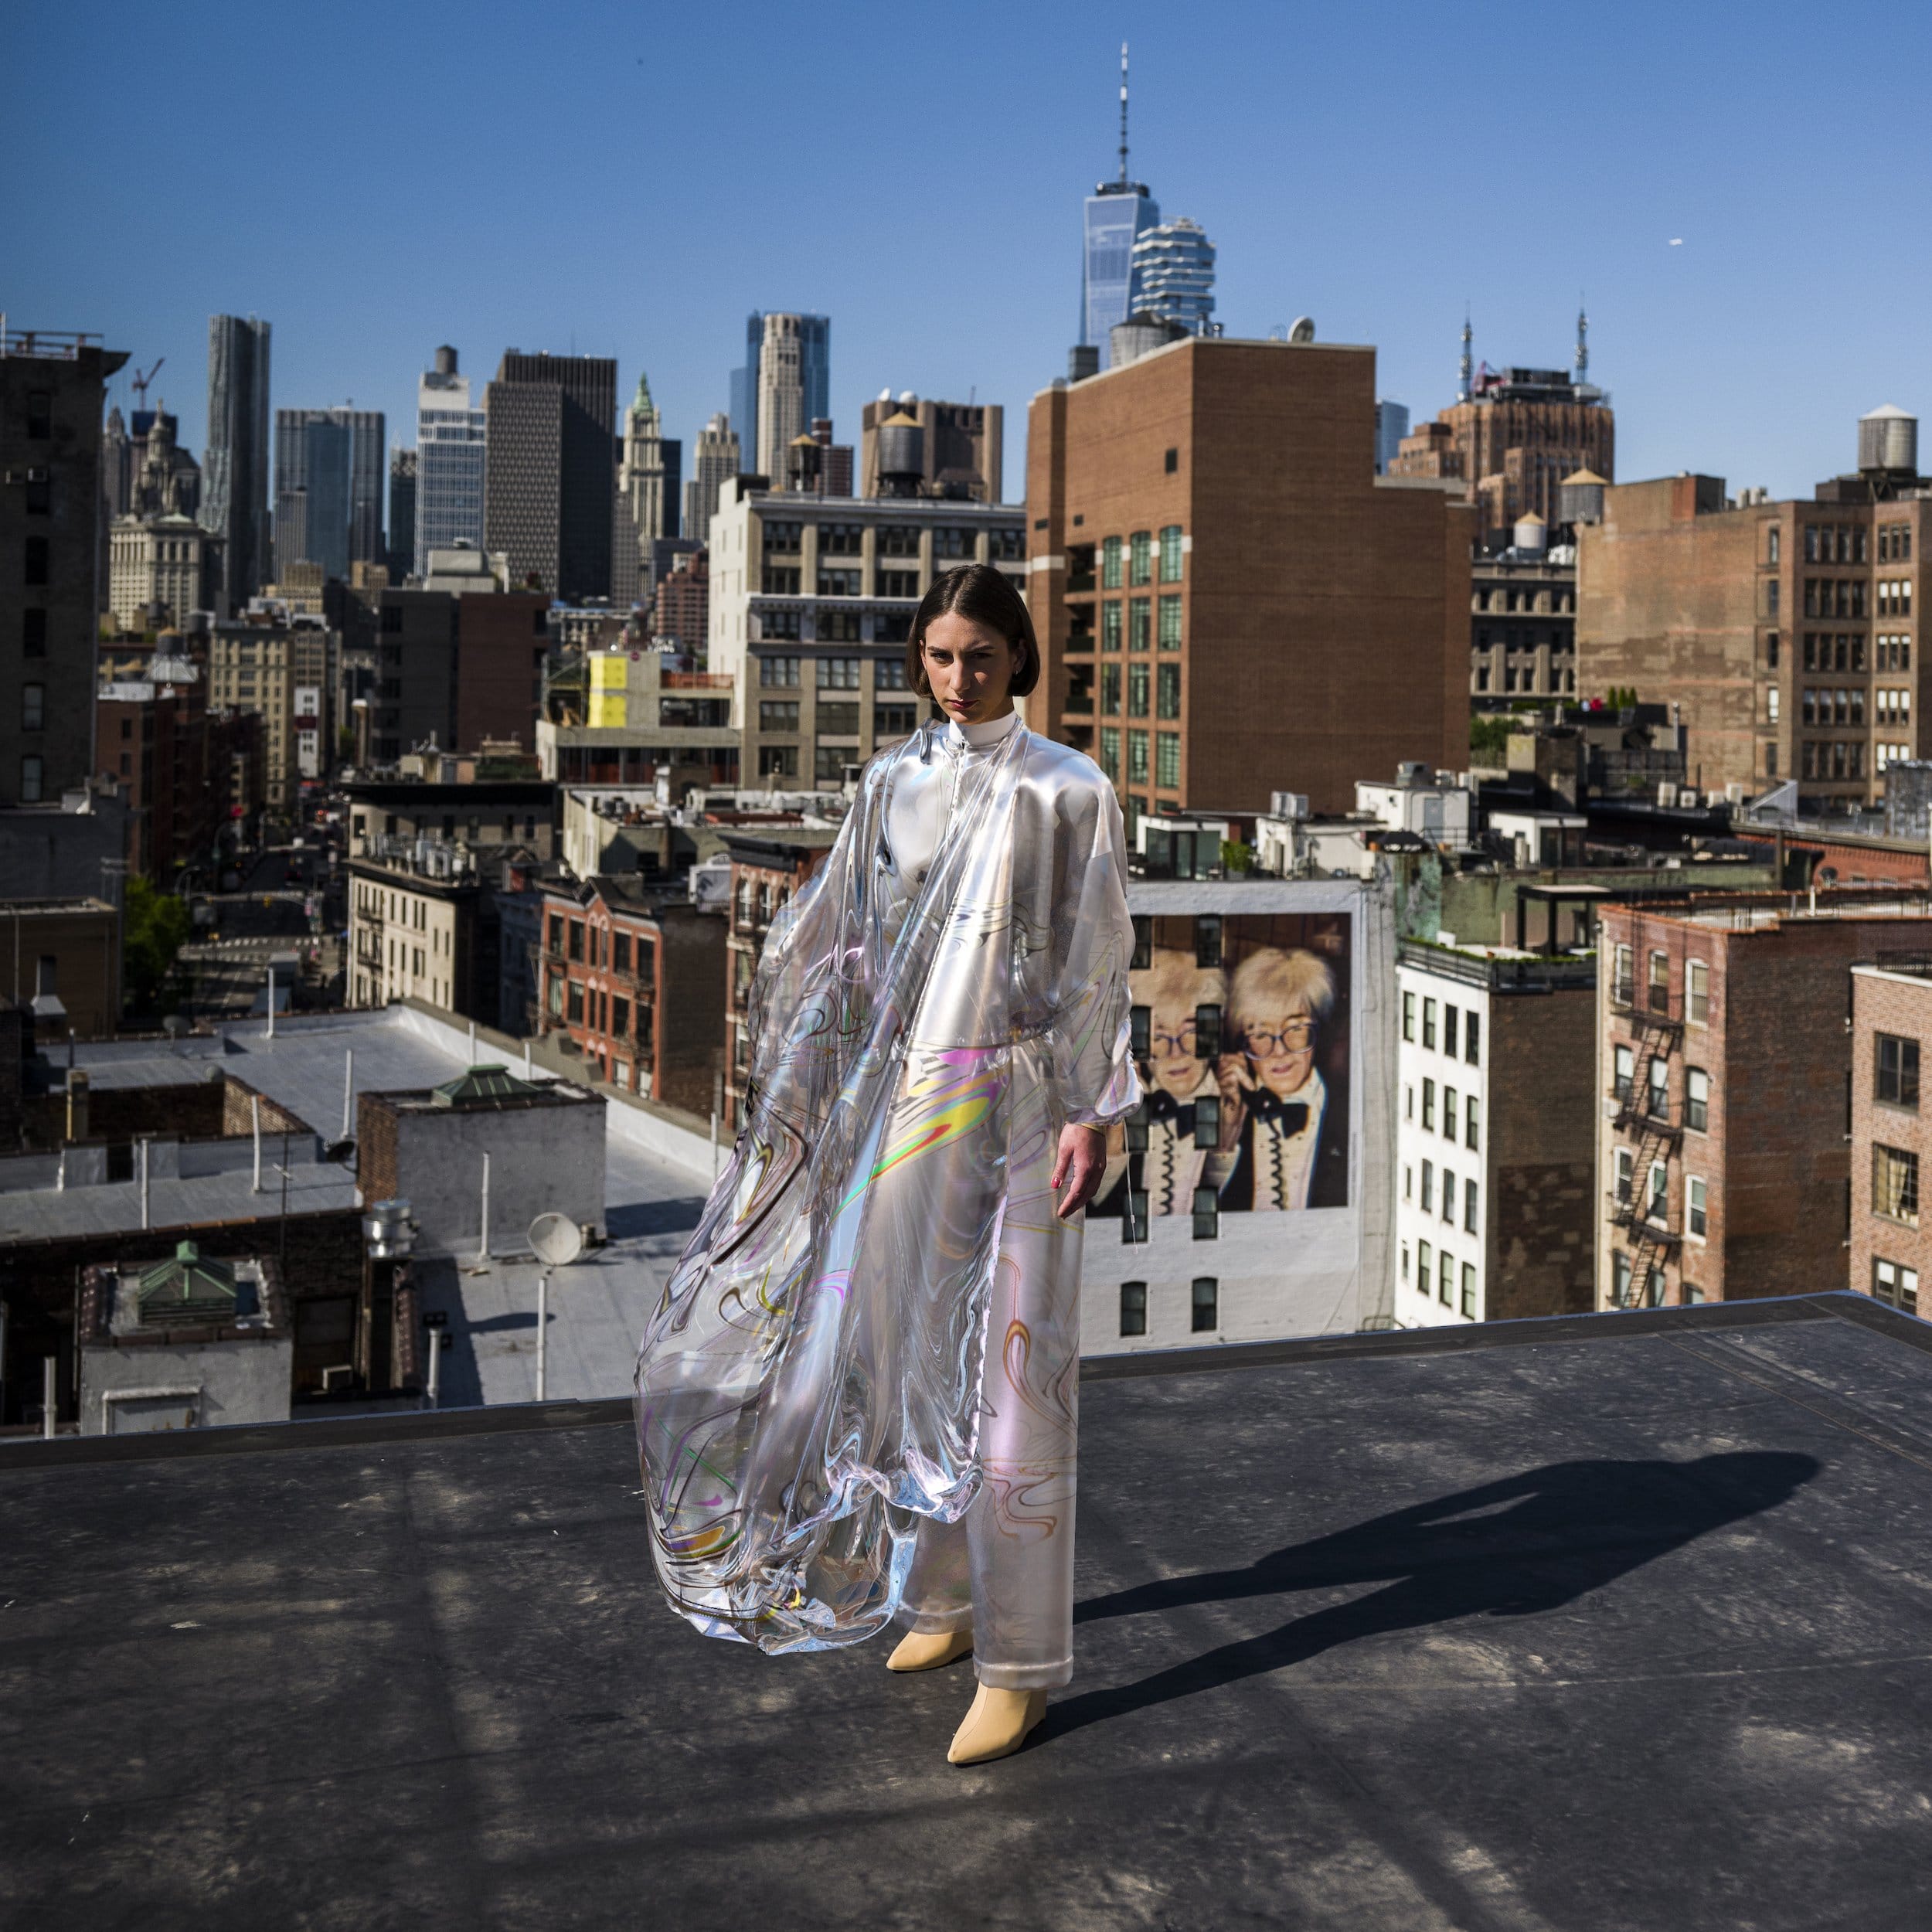 A digital fashion model standing on the rooftop in a flowy dress